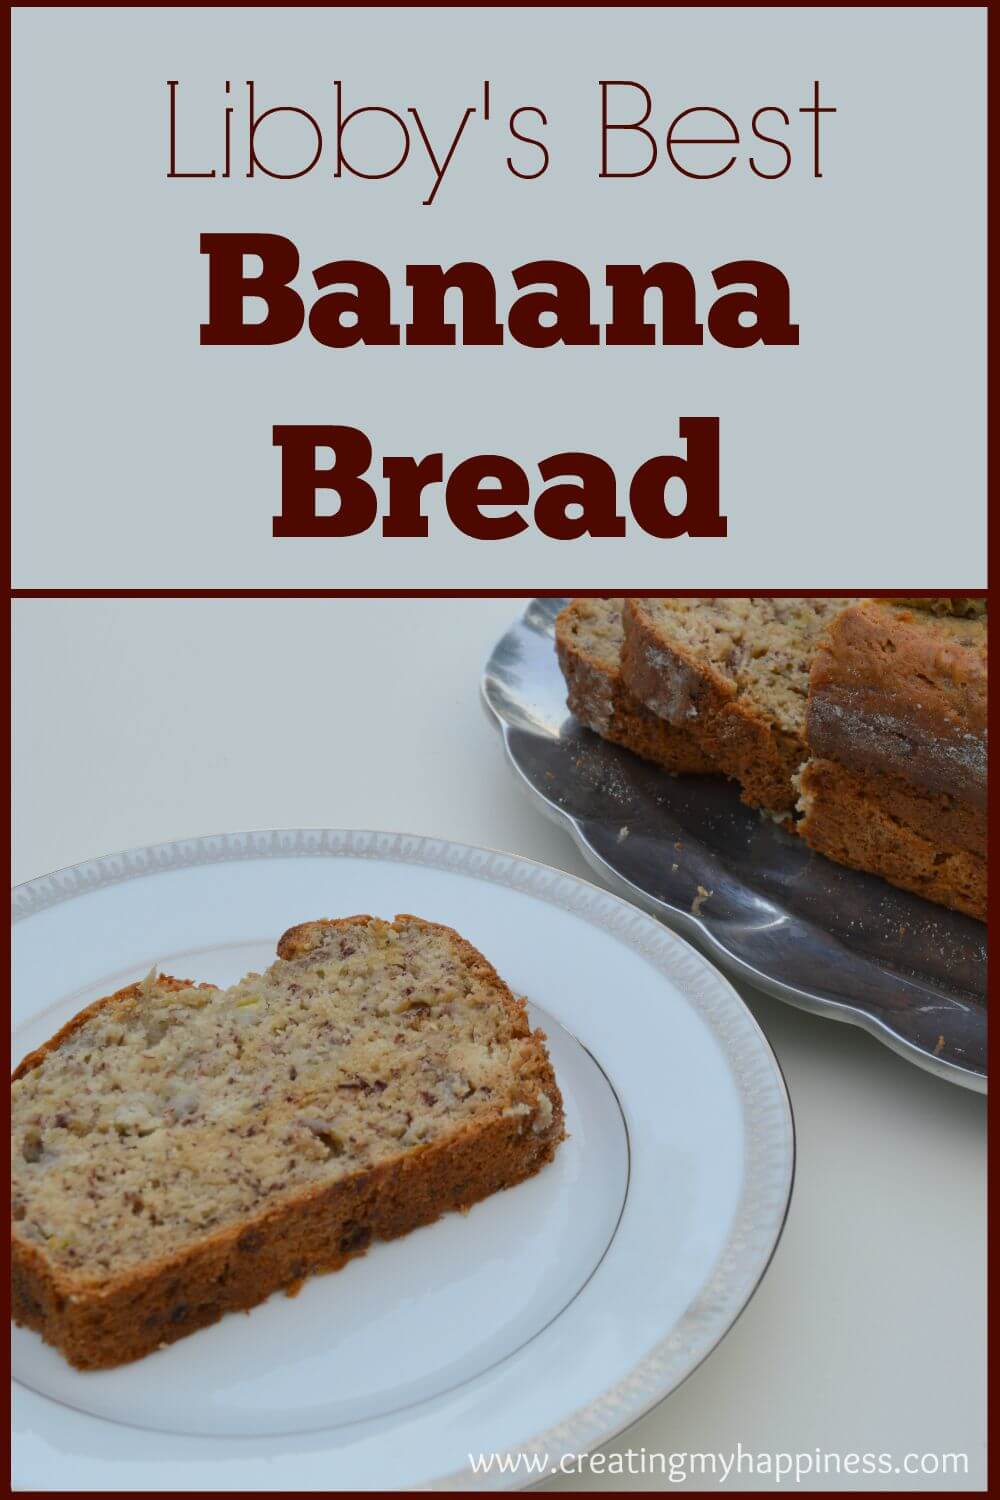 With this simple recipe you can say goodbye to dry banana bread forever. Just 6 ingredients will get you the best banana bread you've ever had.